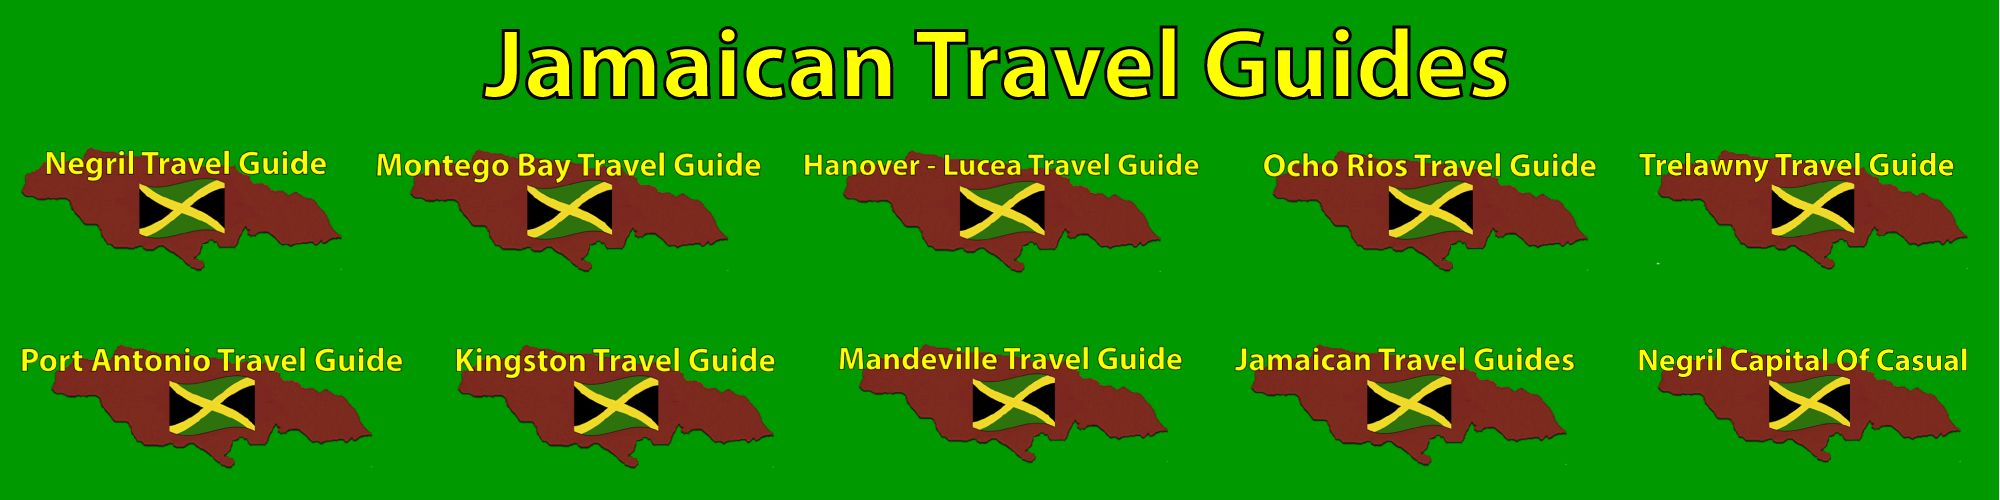 Jamaican Travel Guides - www.jamaicantravelguides.com - www.jamaicatravelguides.com